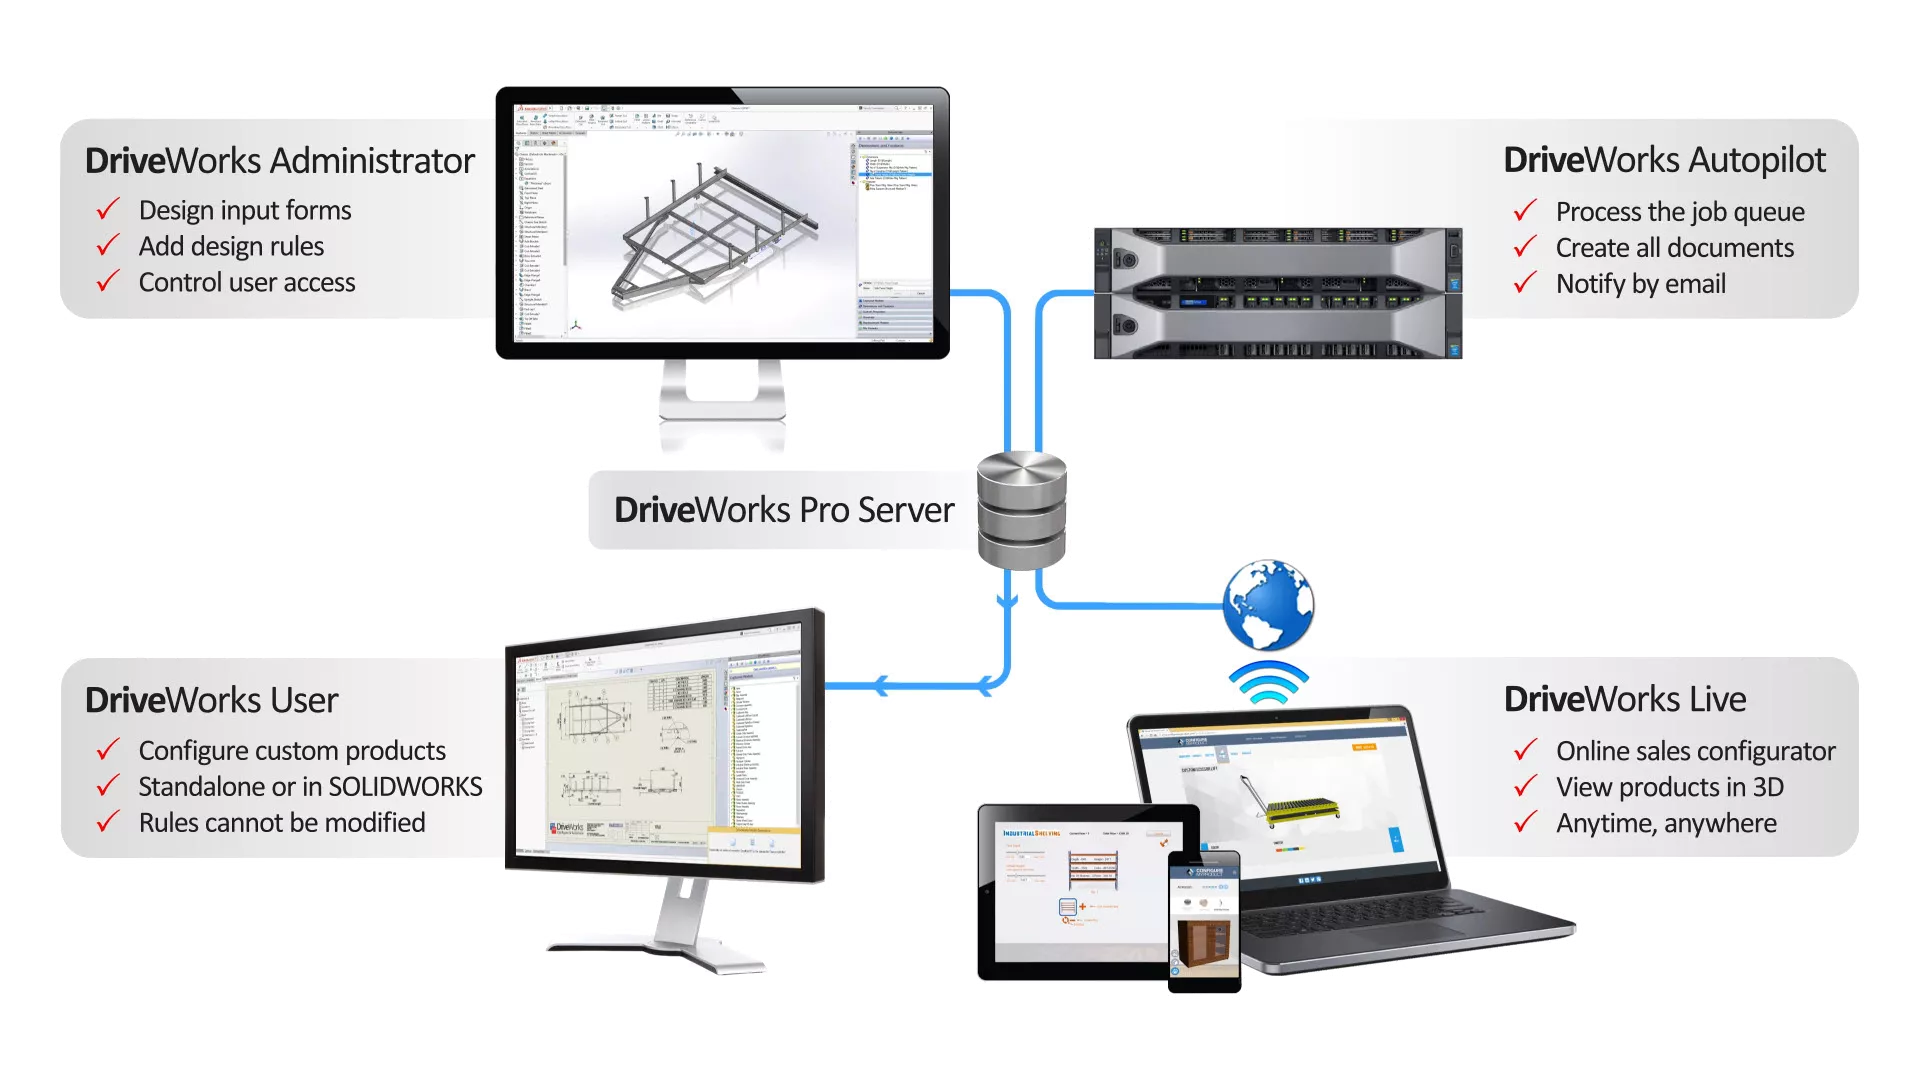 Available modules with Driveworks Pro